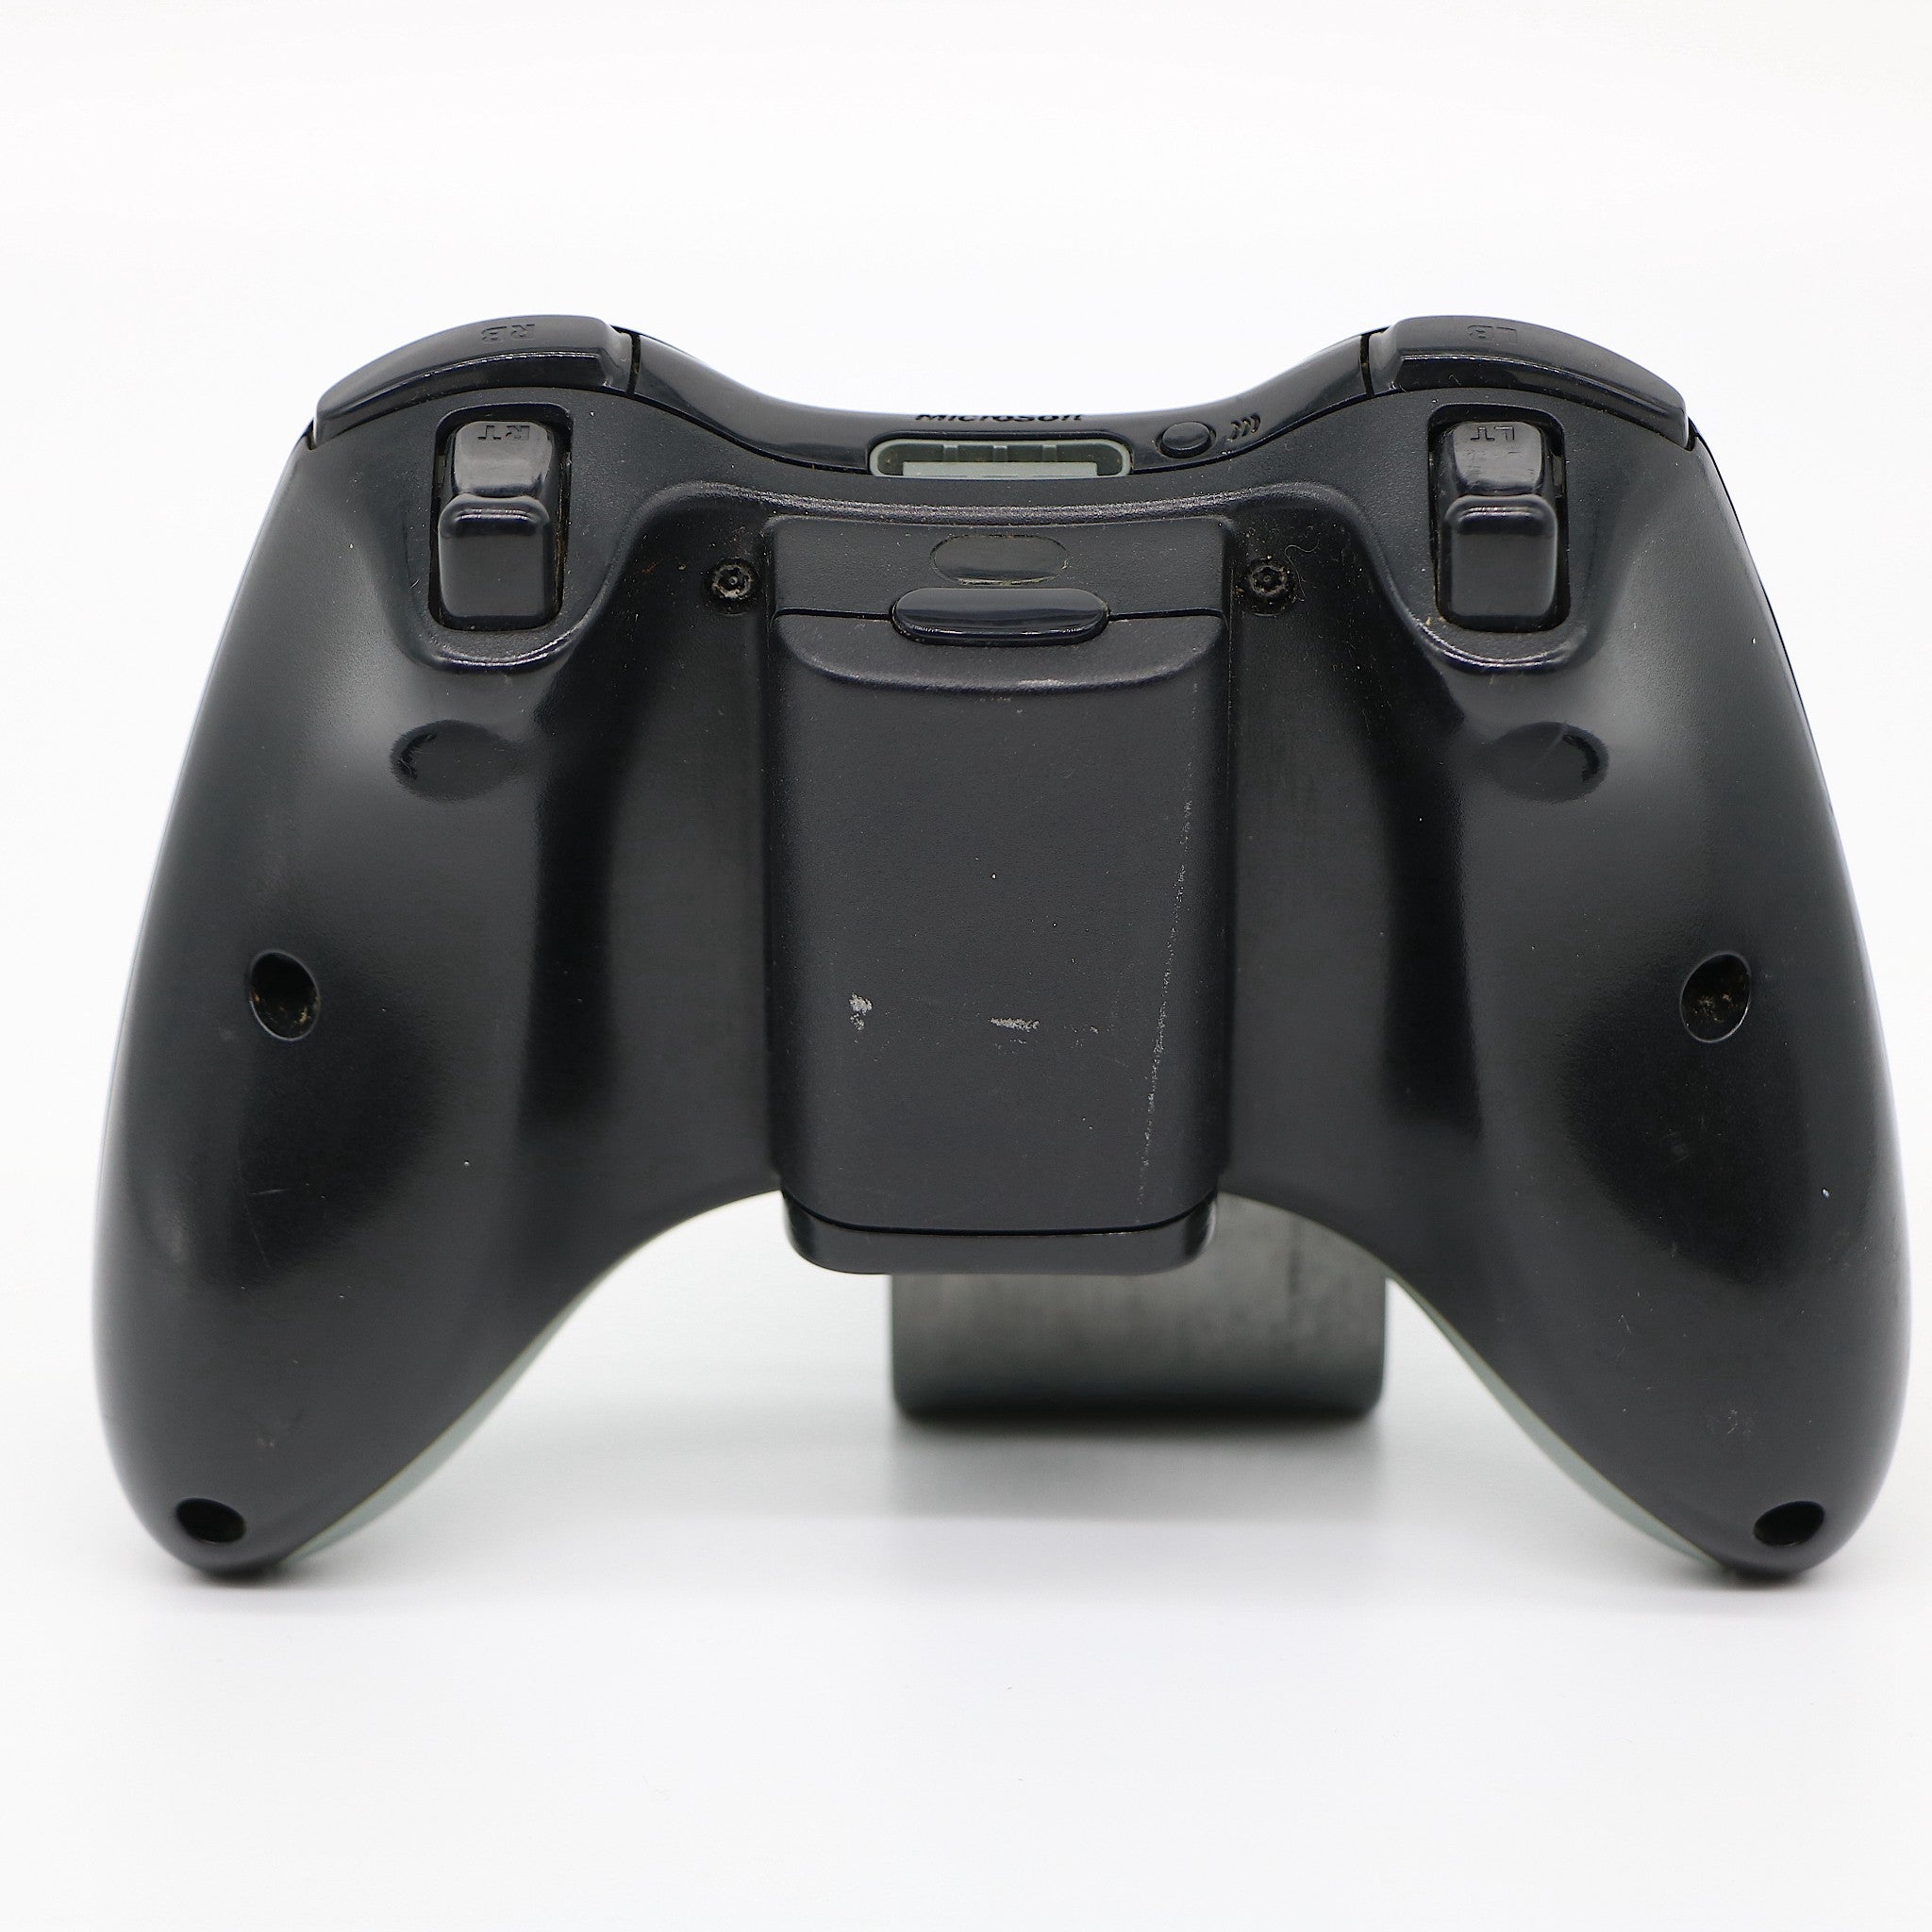 Official Genuine Black Elite Xbox 360 Wireless Controller Pad With Battery Pack